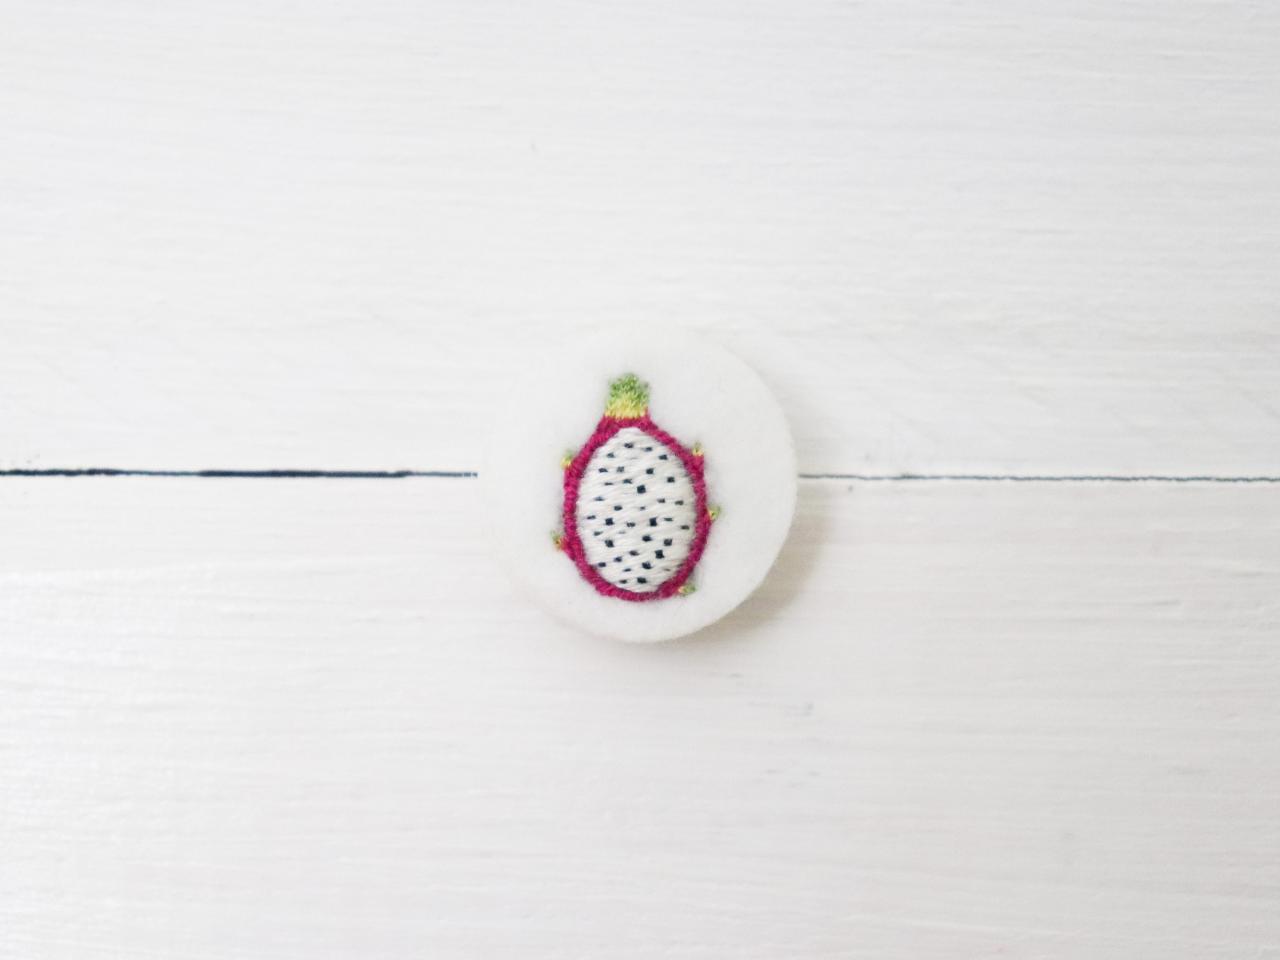 Miniature Embroidery Pin Dragon Fruit Brooch Dragon Fruit Pin Embroidery Pin Hand Embroidery Embroidered Pin Pitaya Felt Brooch Pitaya Pin